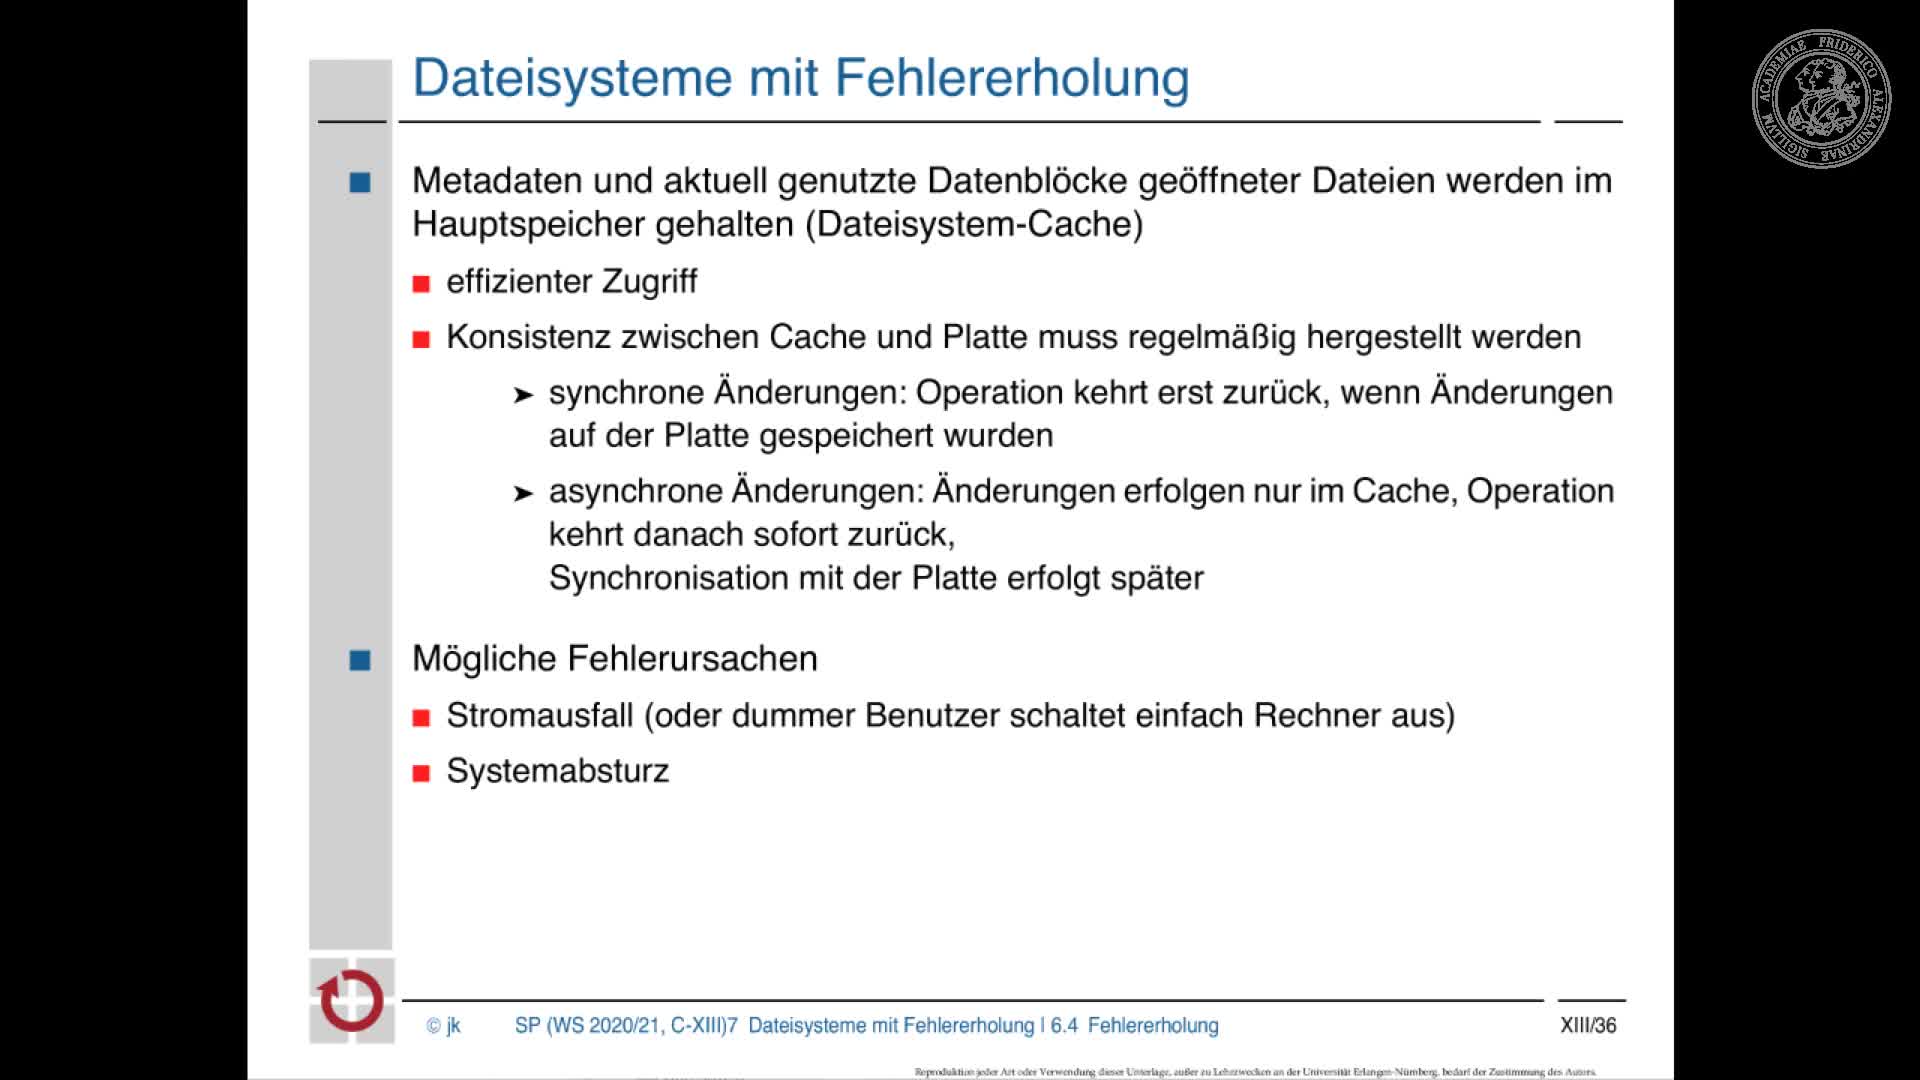 2.2. Dateisysteme mit Fehlererholung preview image